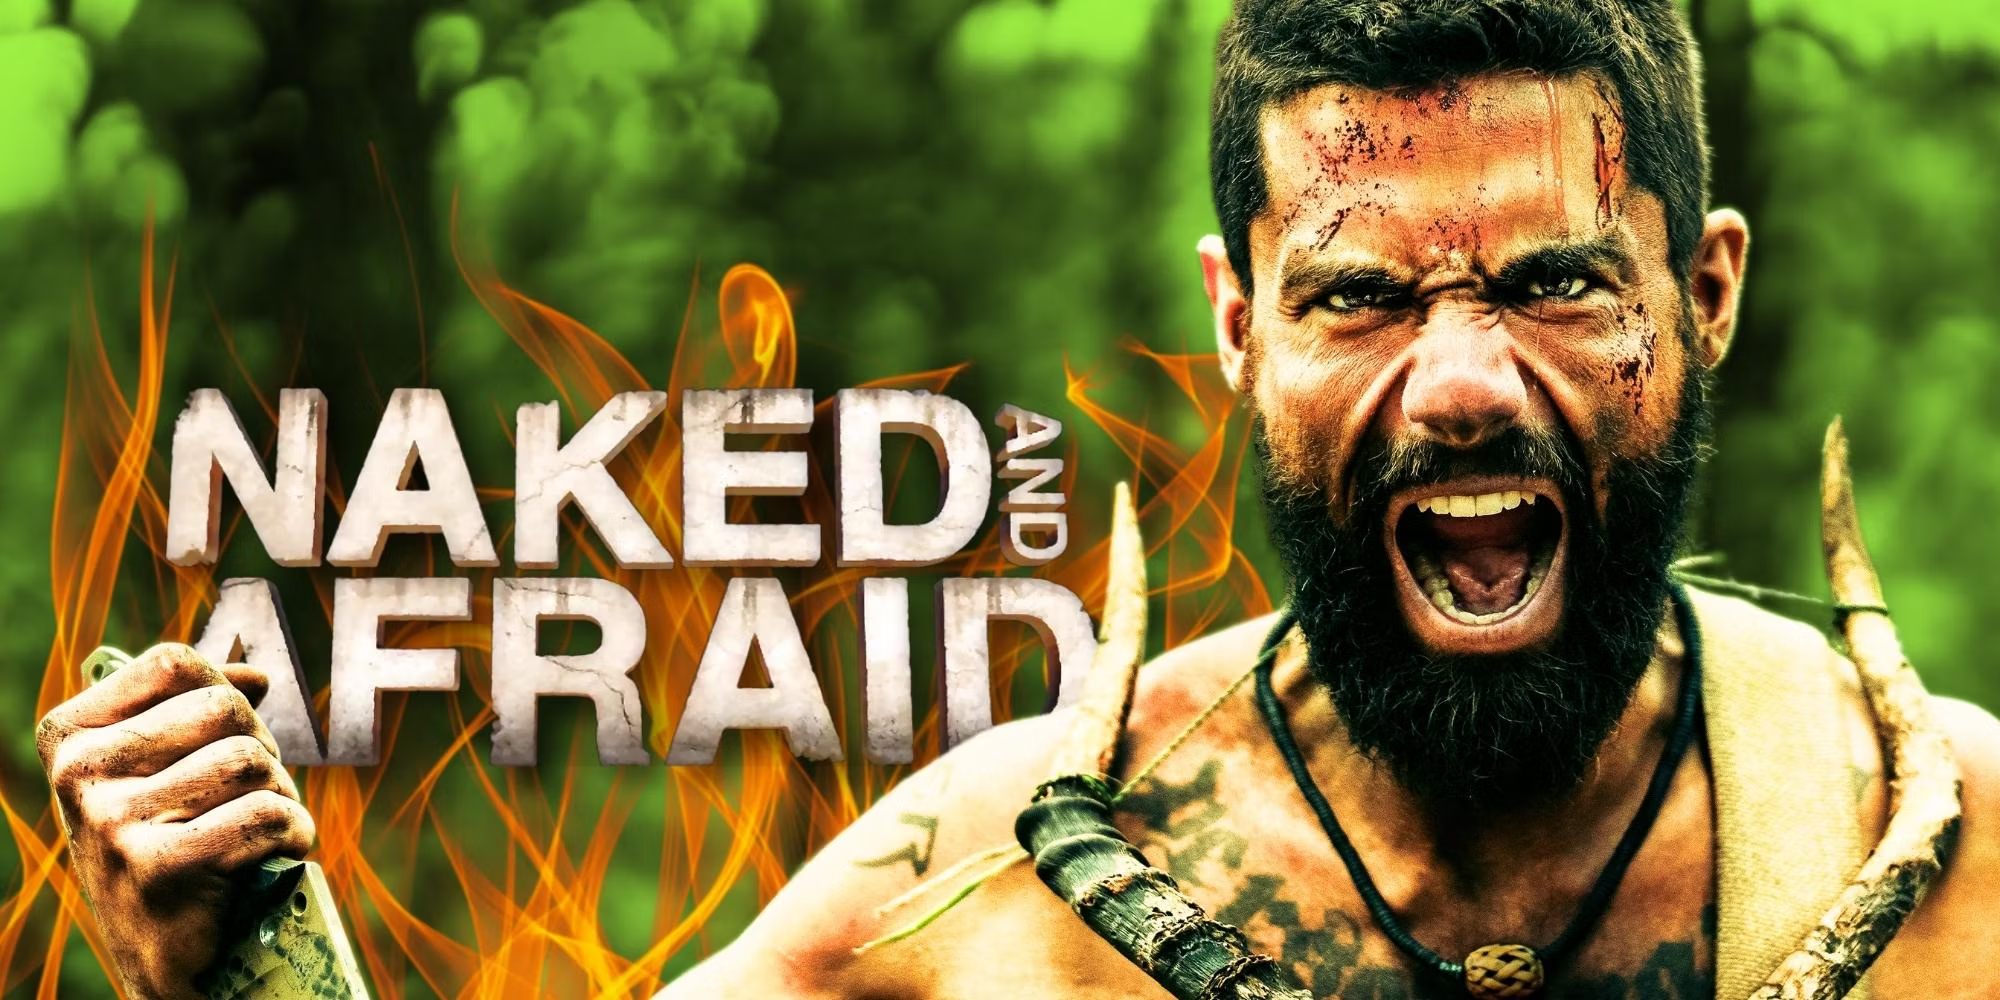 is naked and afraid fake